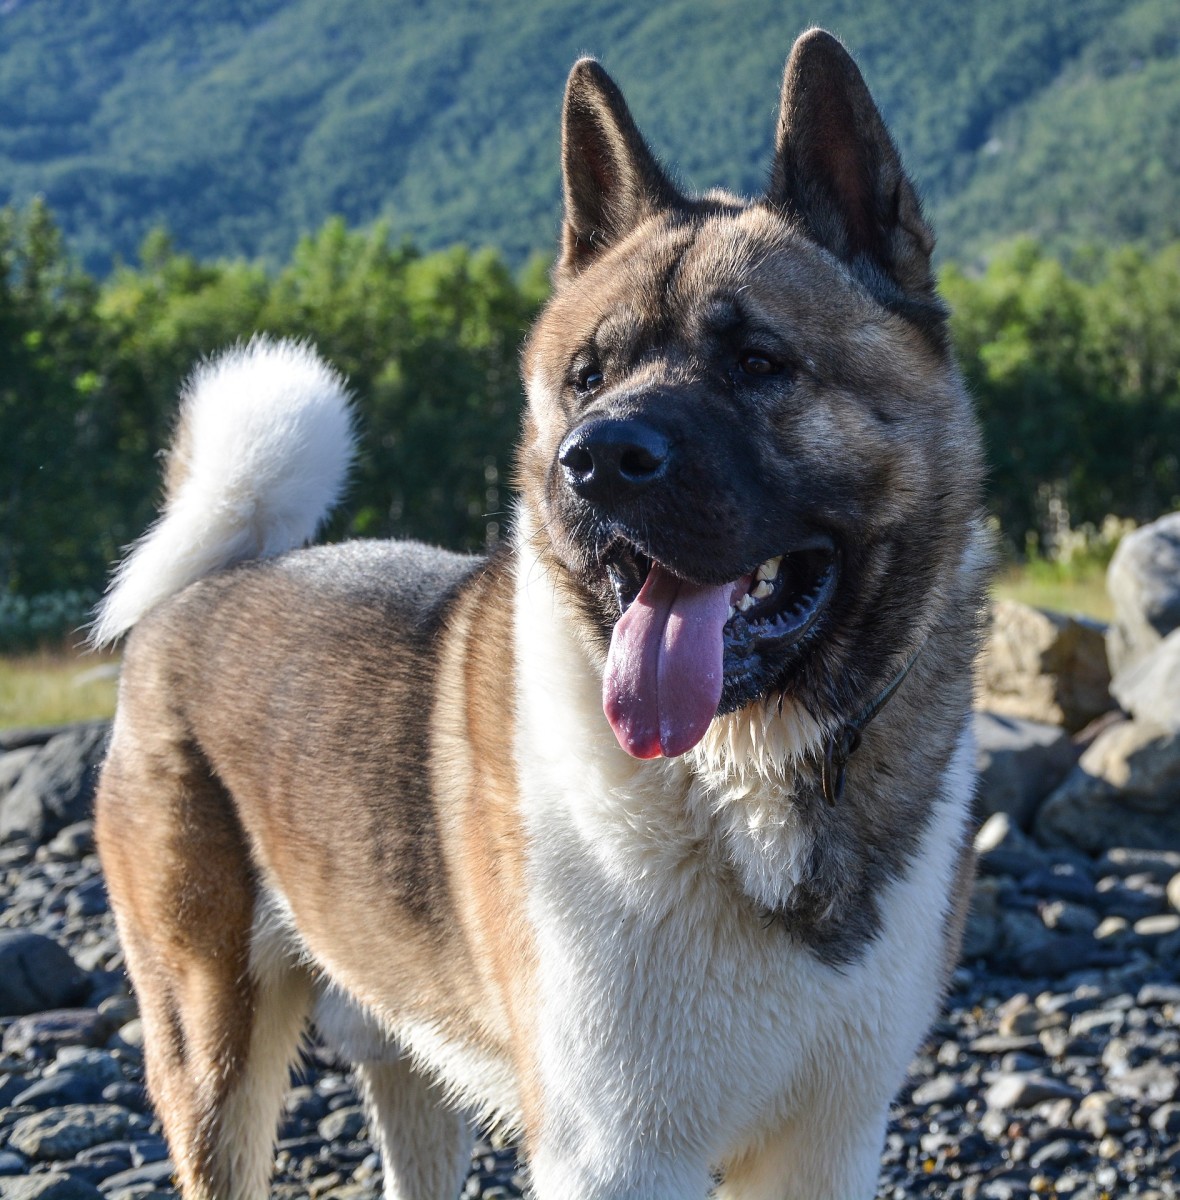 Japanese Akitas are a little smaller than their American cousins, and fewer colors are allowed in Japan.